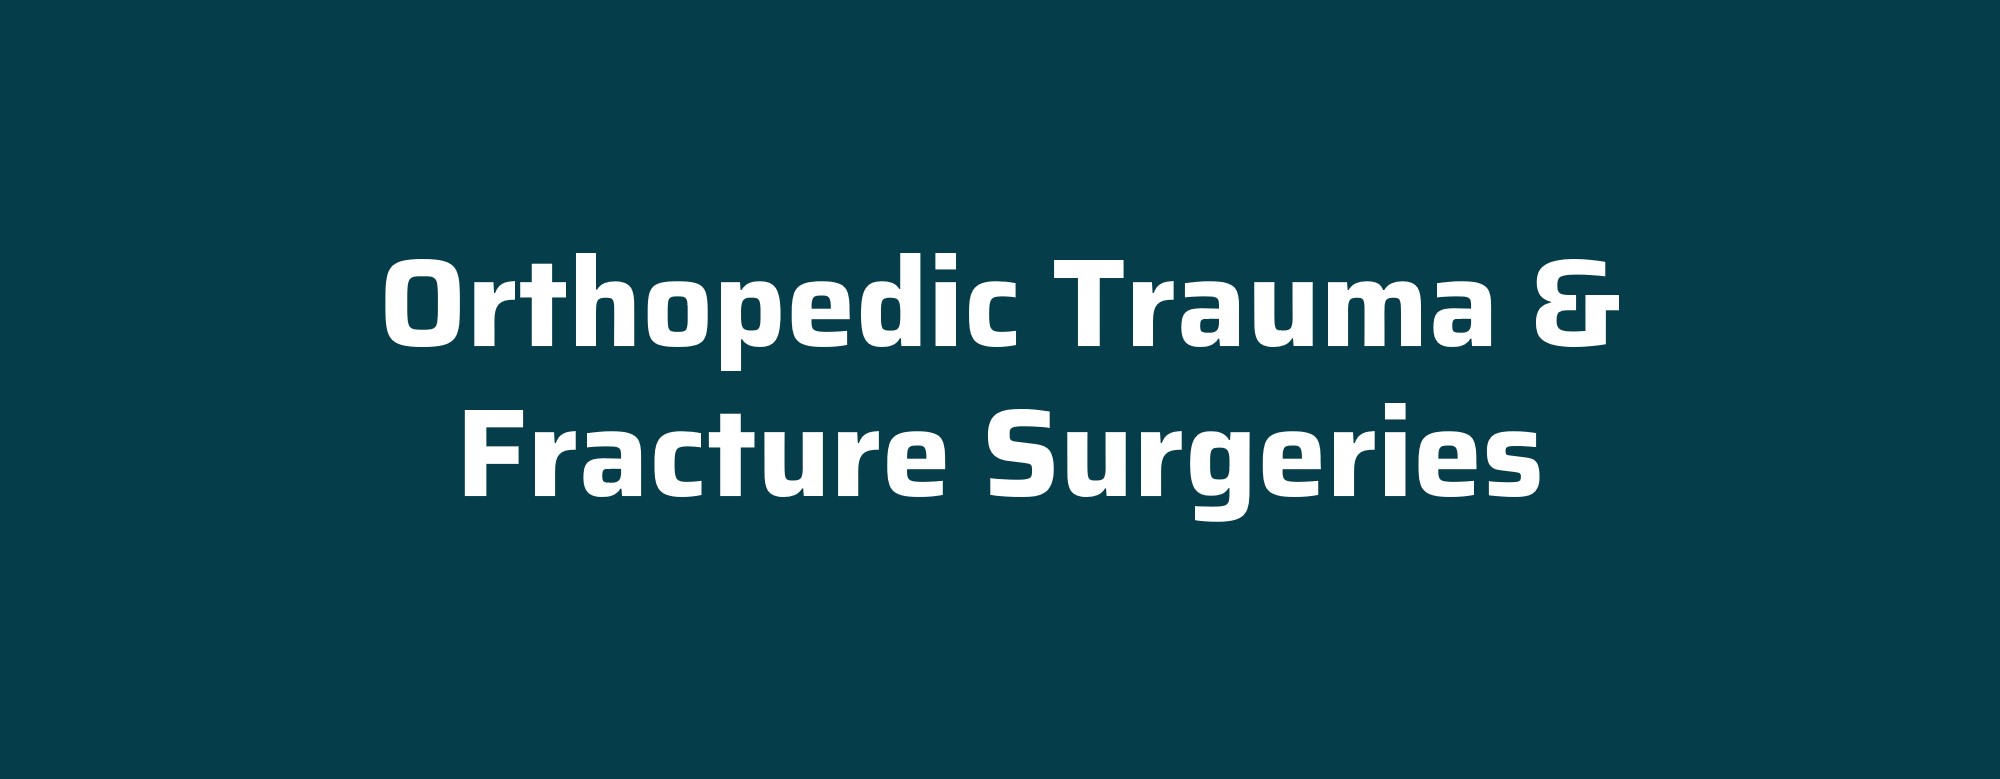 fracture_surgery_main